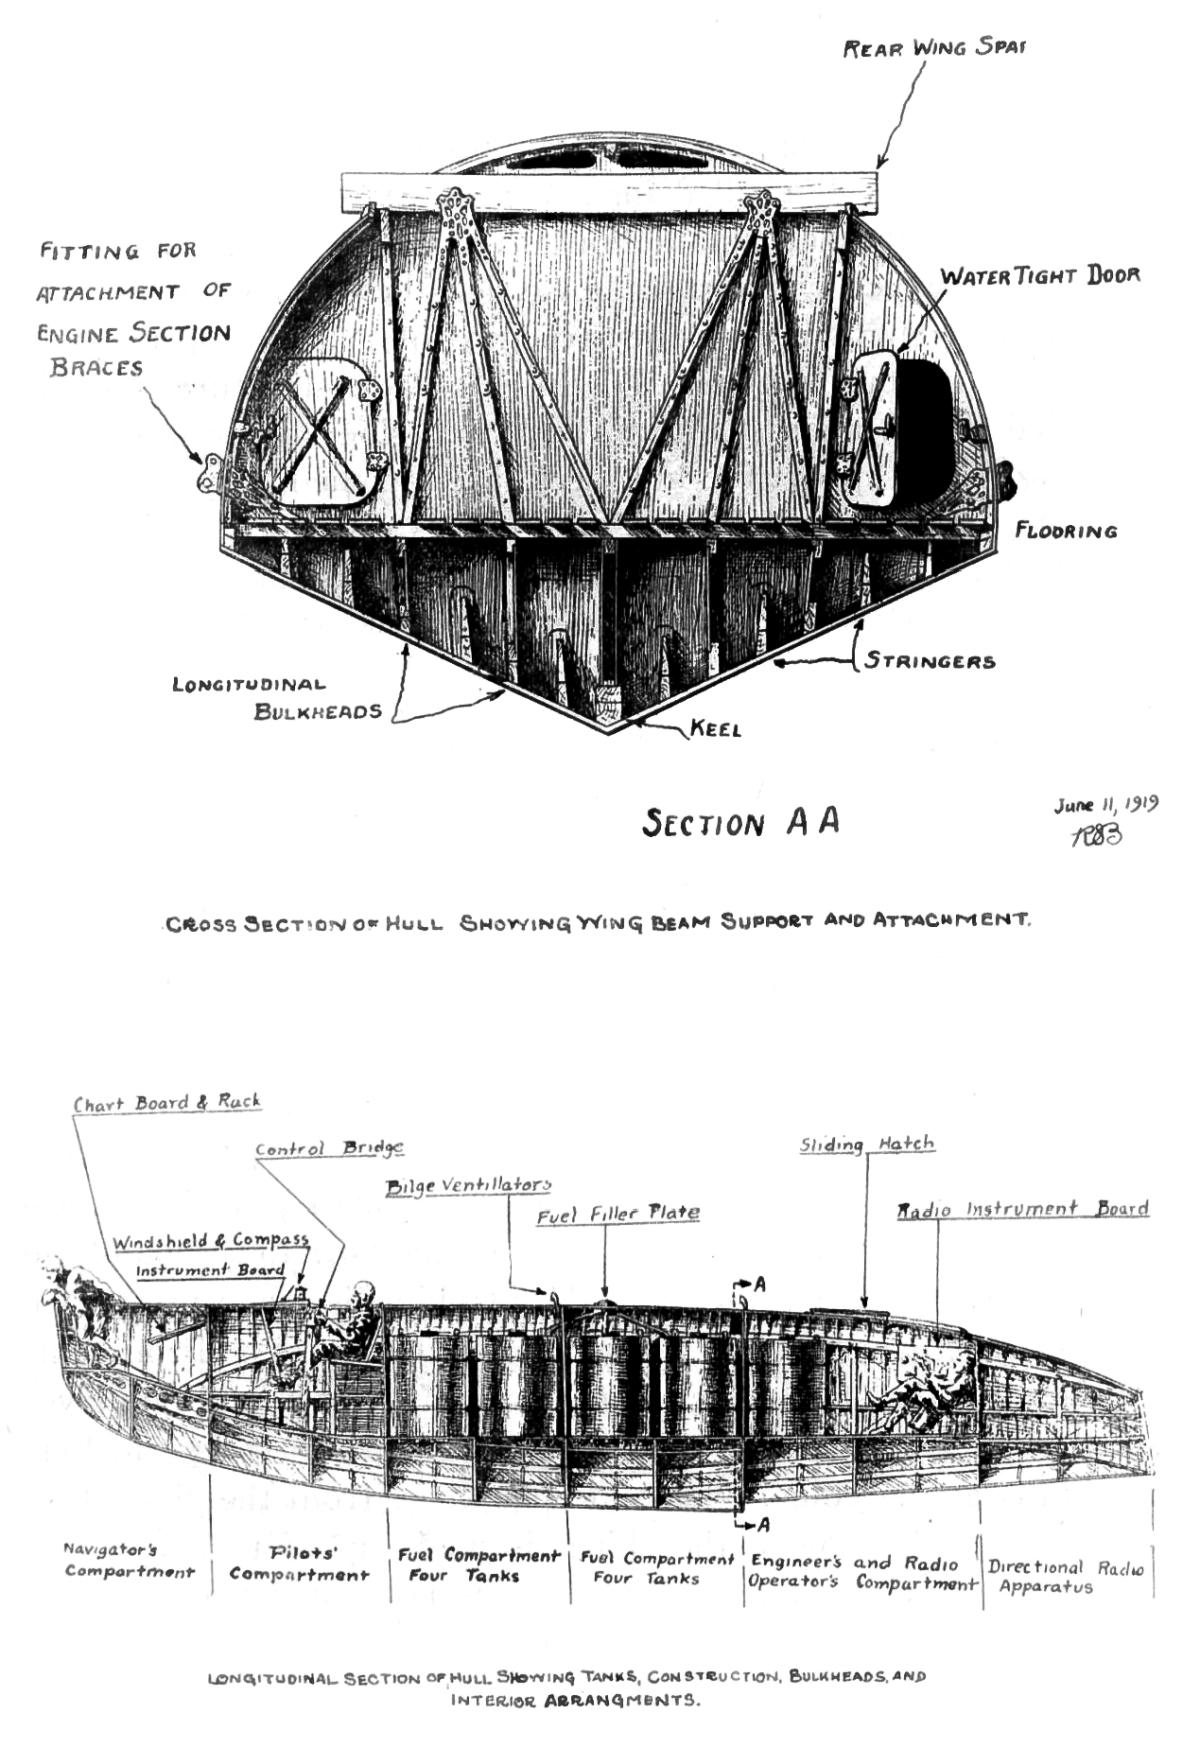 Cross- and longitudinal sections of NC Boat Hull